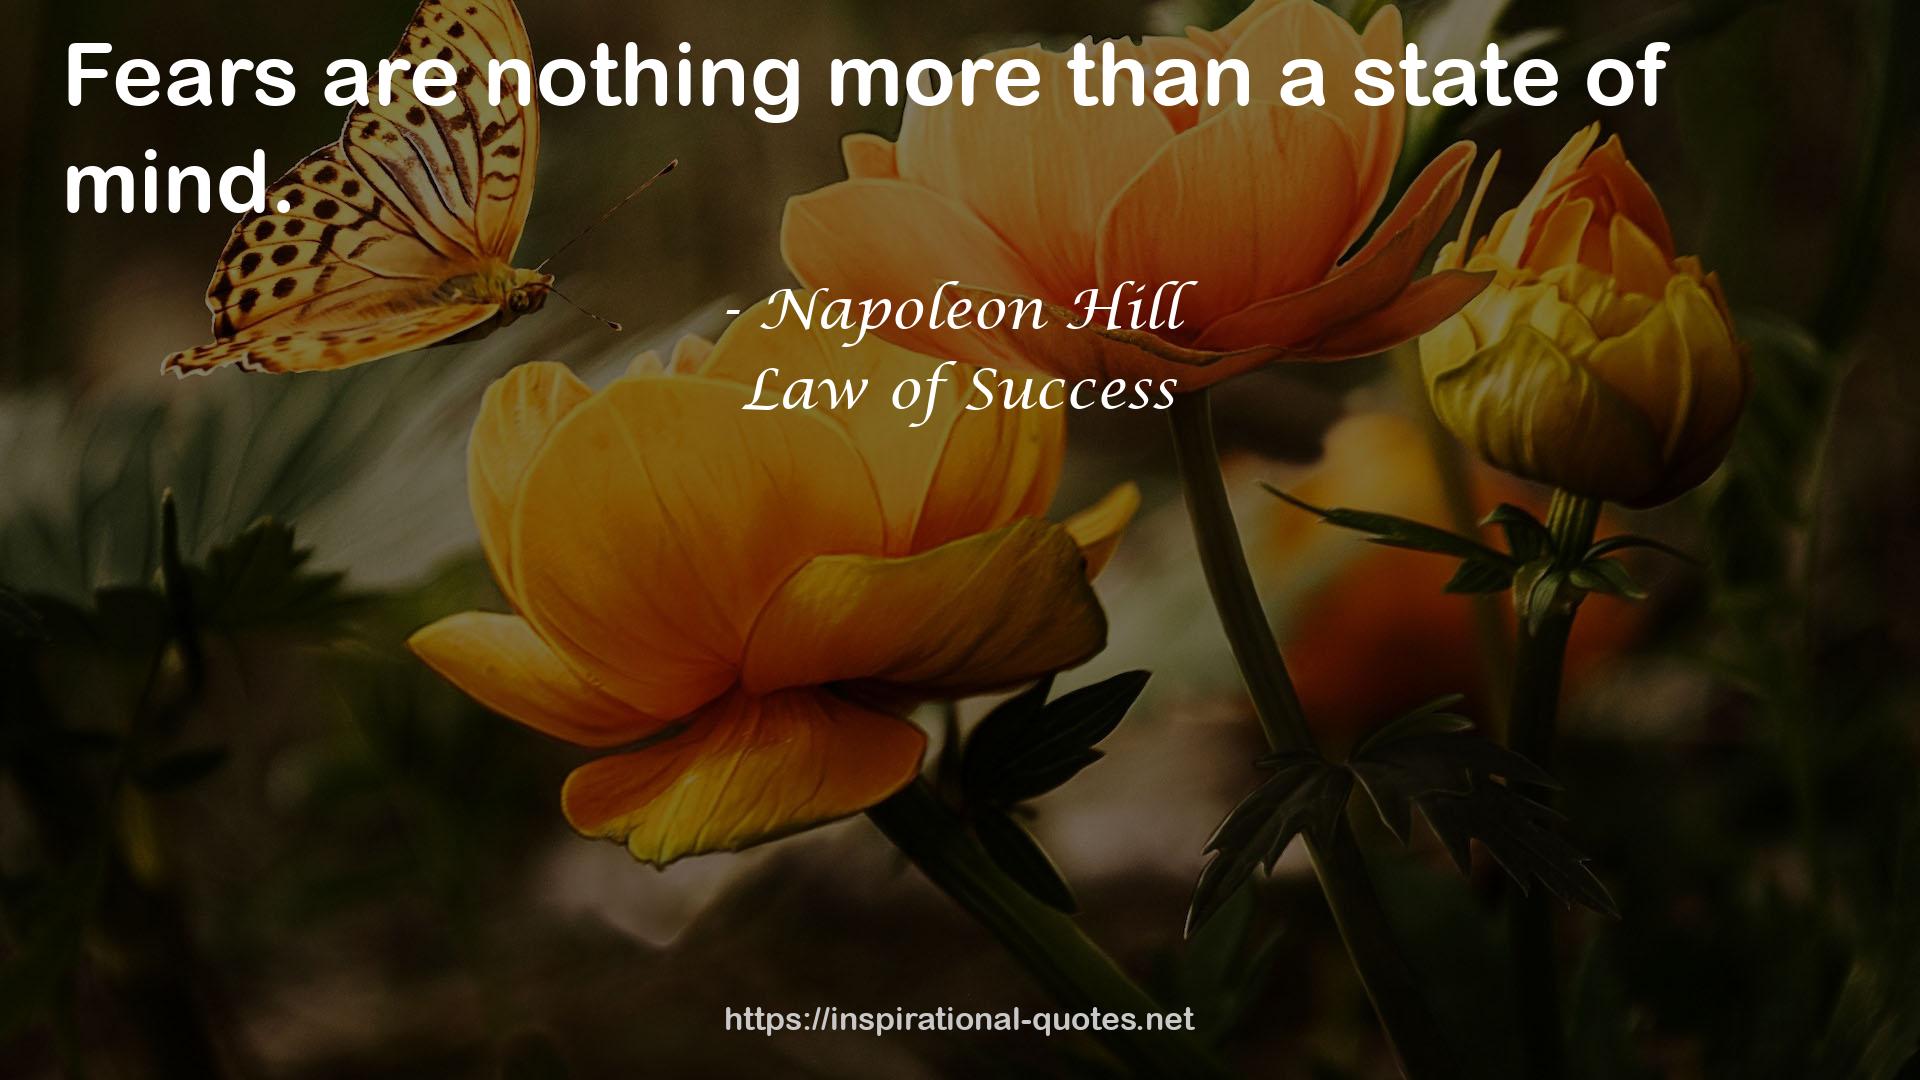 Law of Success QUOTES